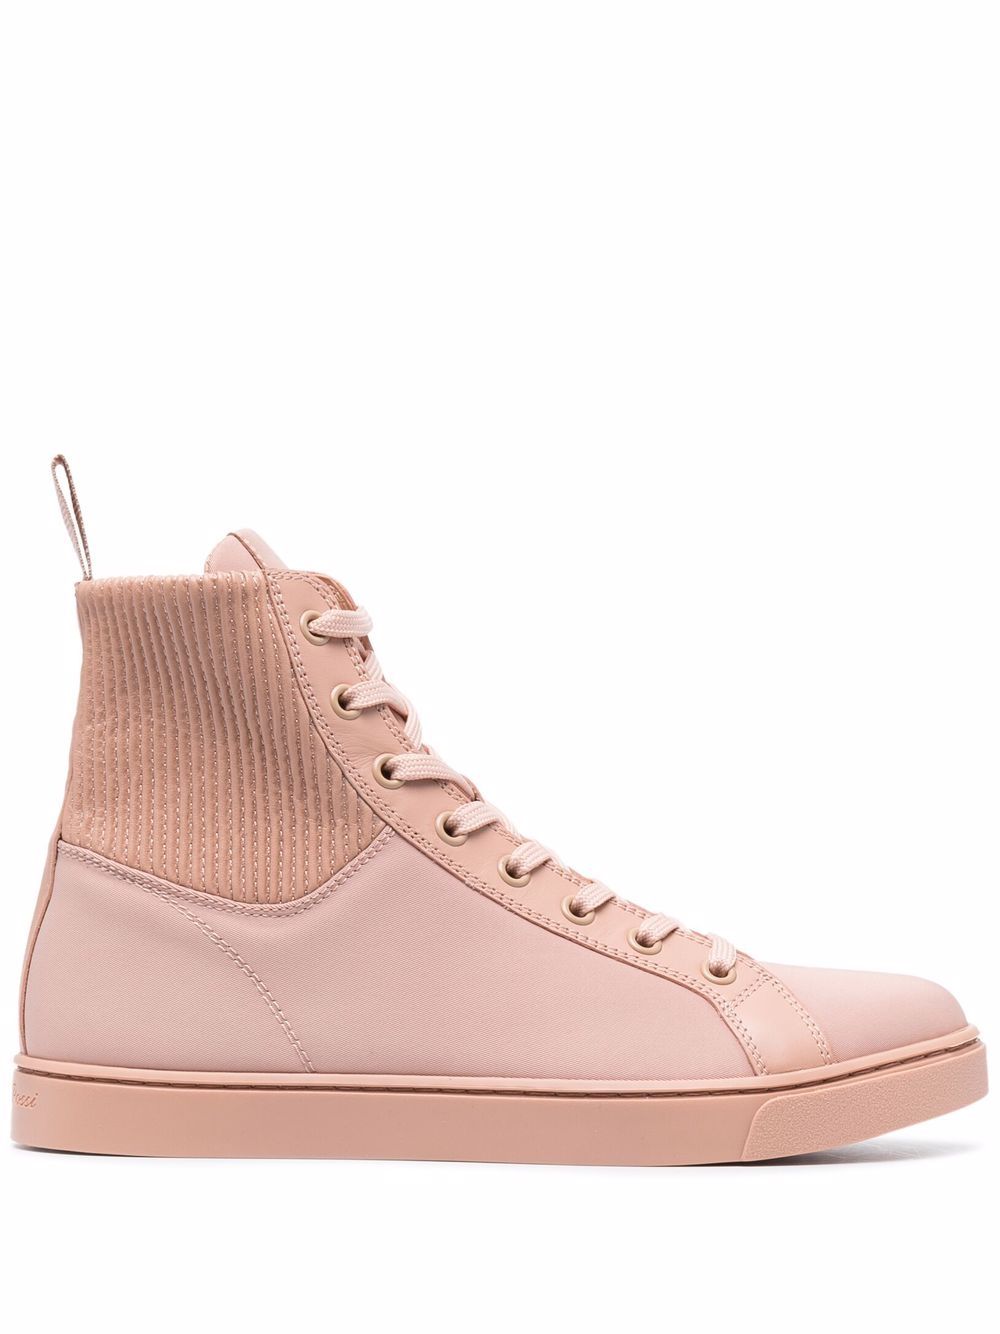 knit-panelled high-top sneakers